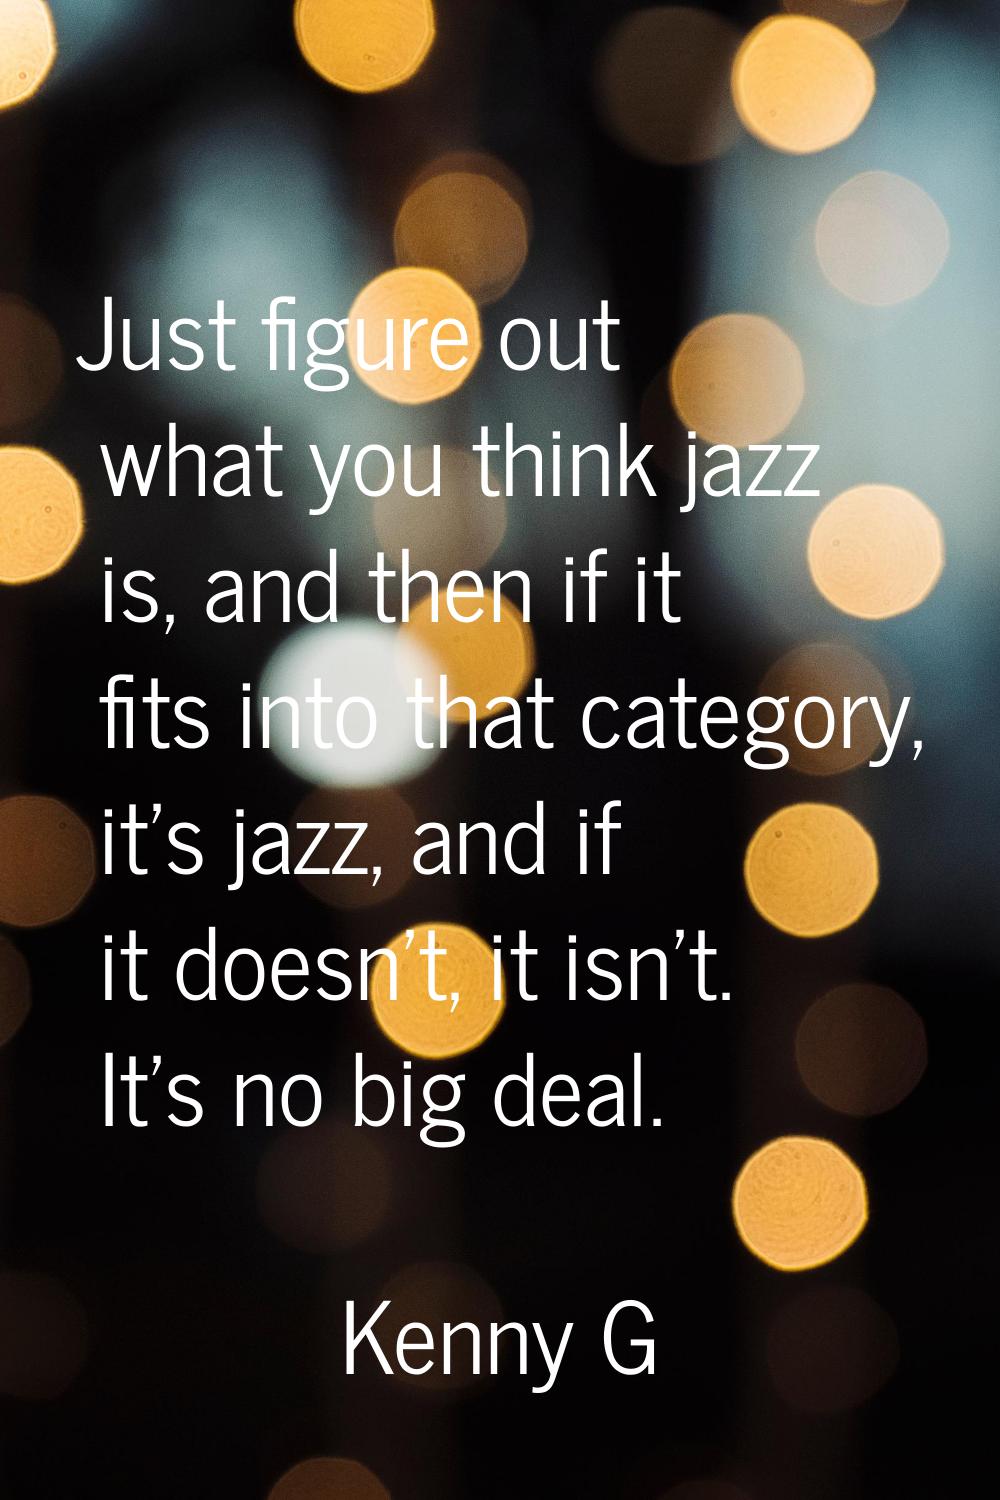 Just figure out what you think jazz is, and then if it fits into that category, it's jazz, and if i